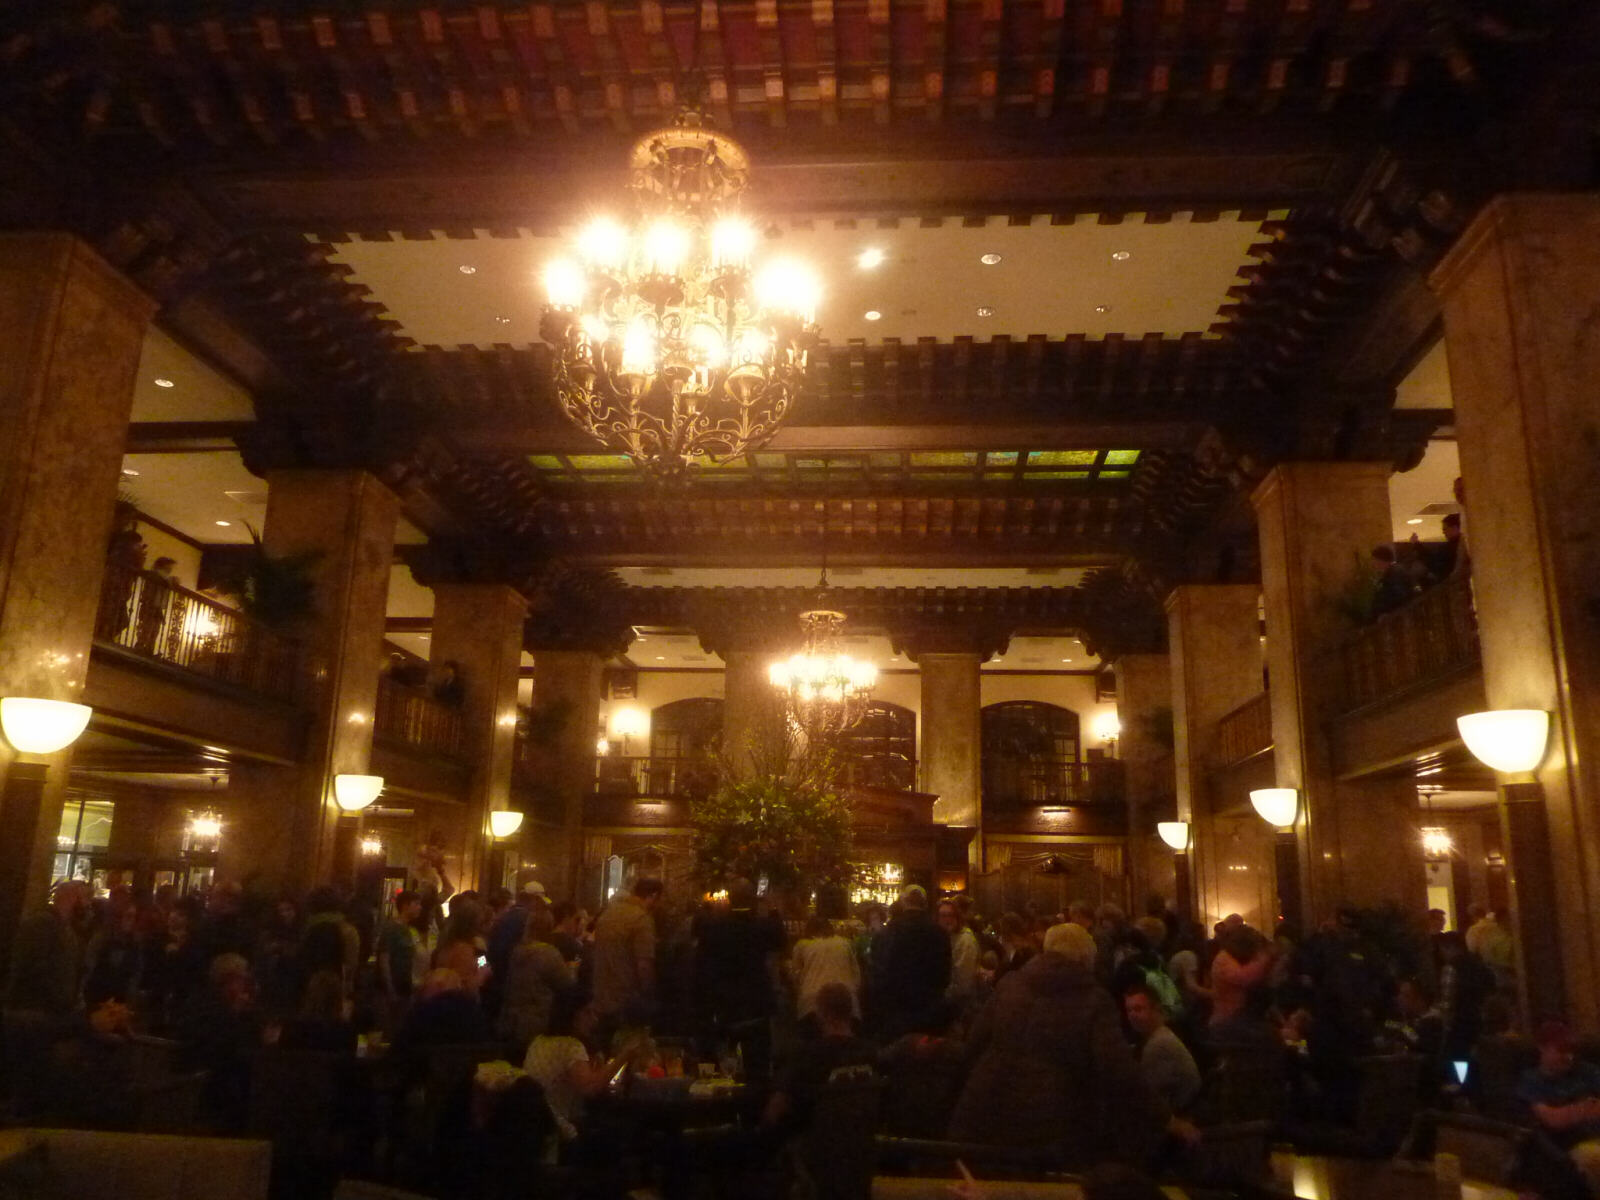 Lobby of the Peabody hotel in Memphis, Tennessee